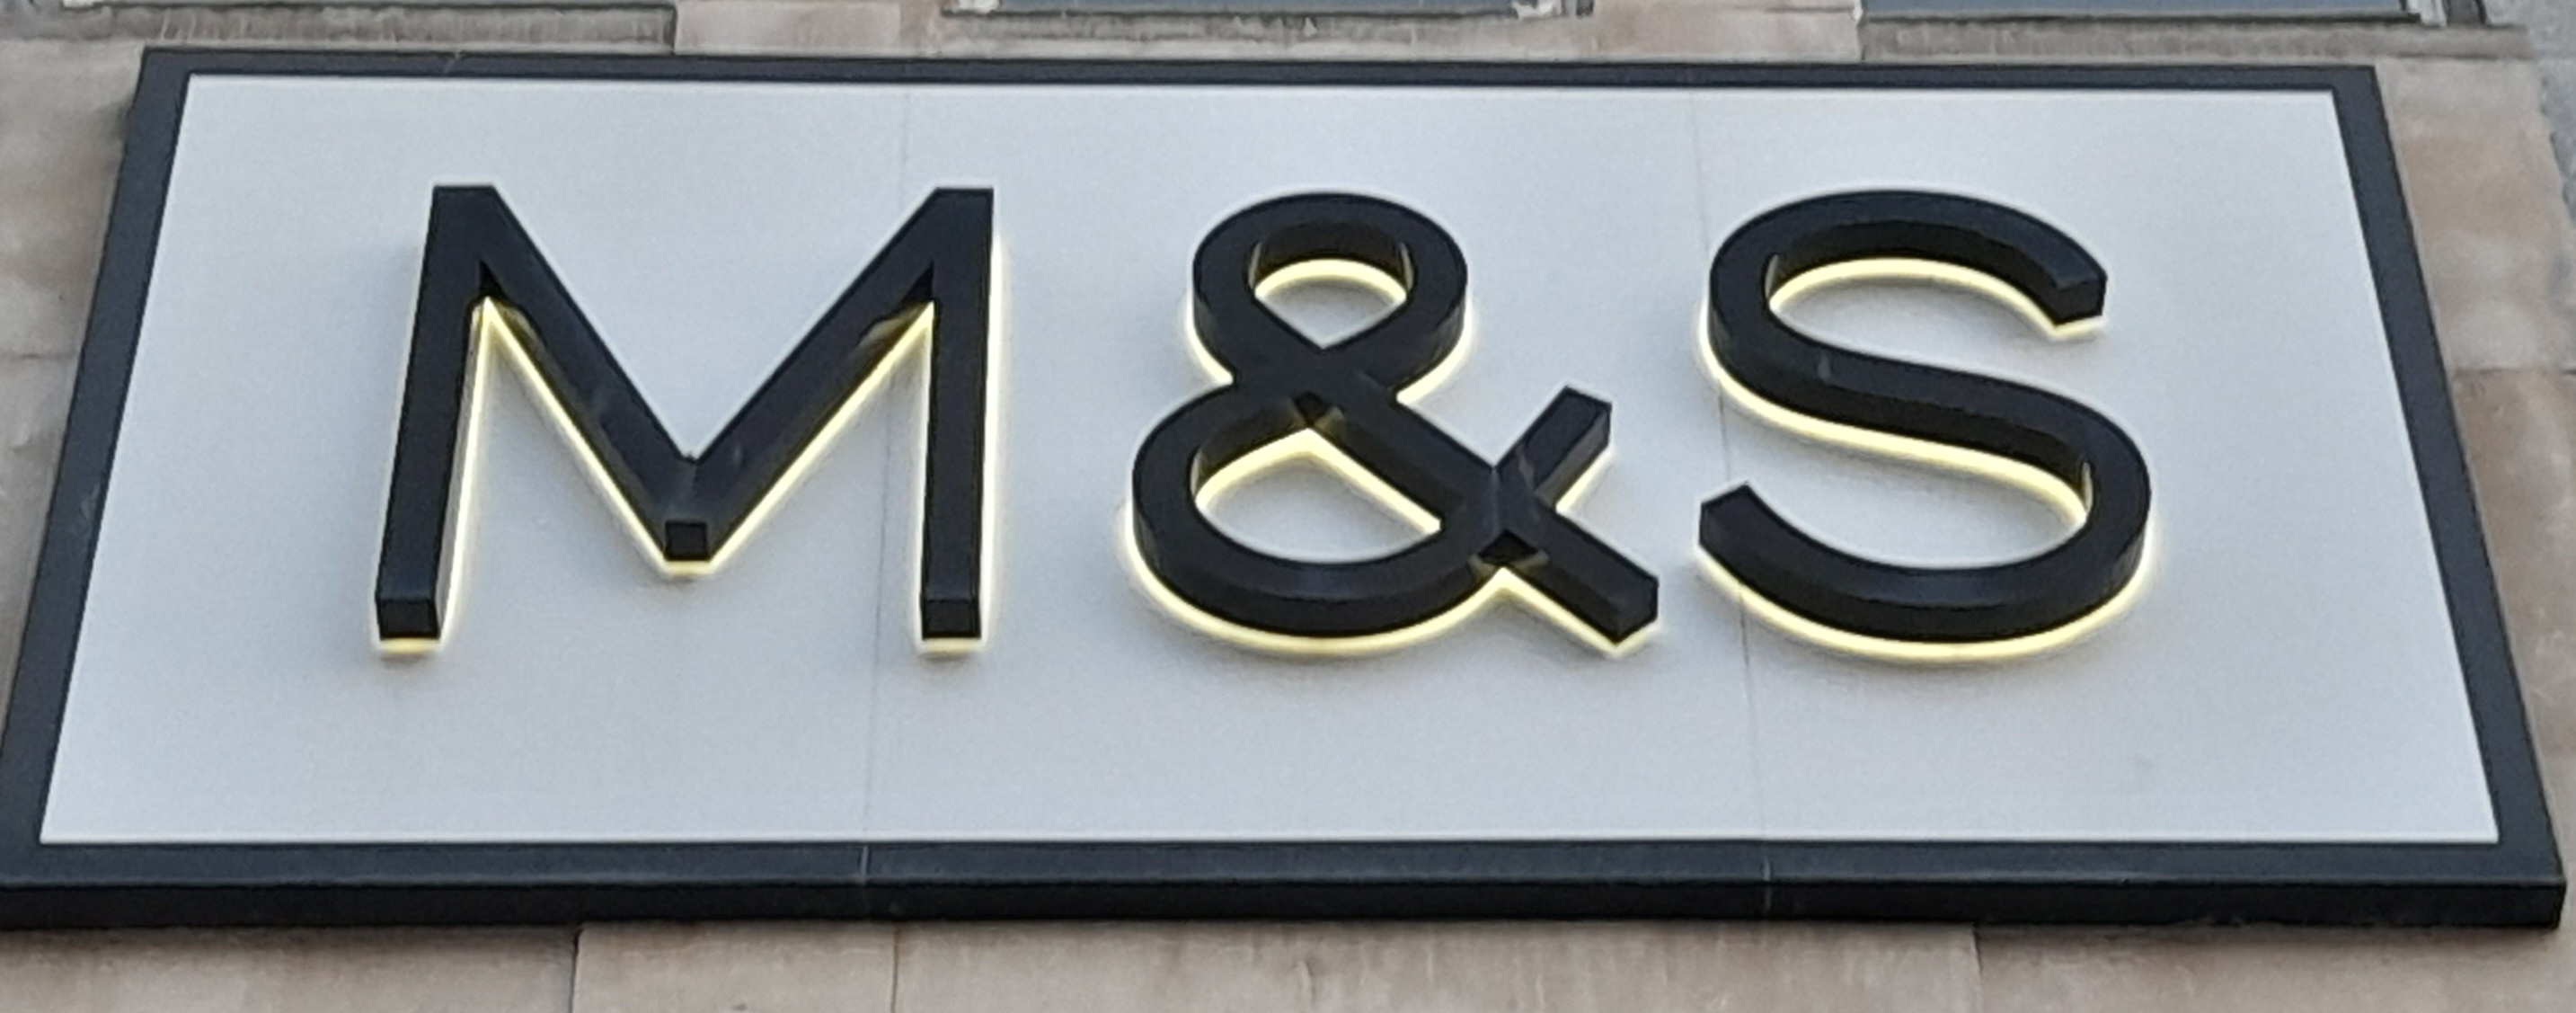 Marks and Spencer facing Valentine’s Day protests in Liverpool, over Logistics Group Holdings’ pay dispute